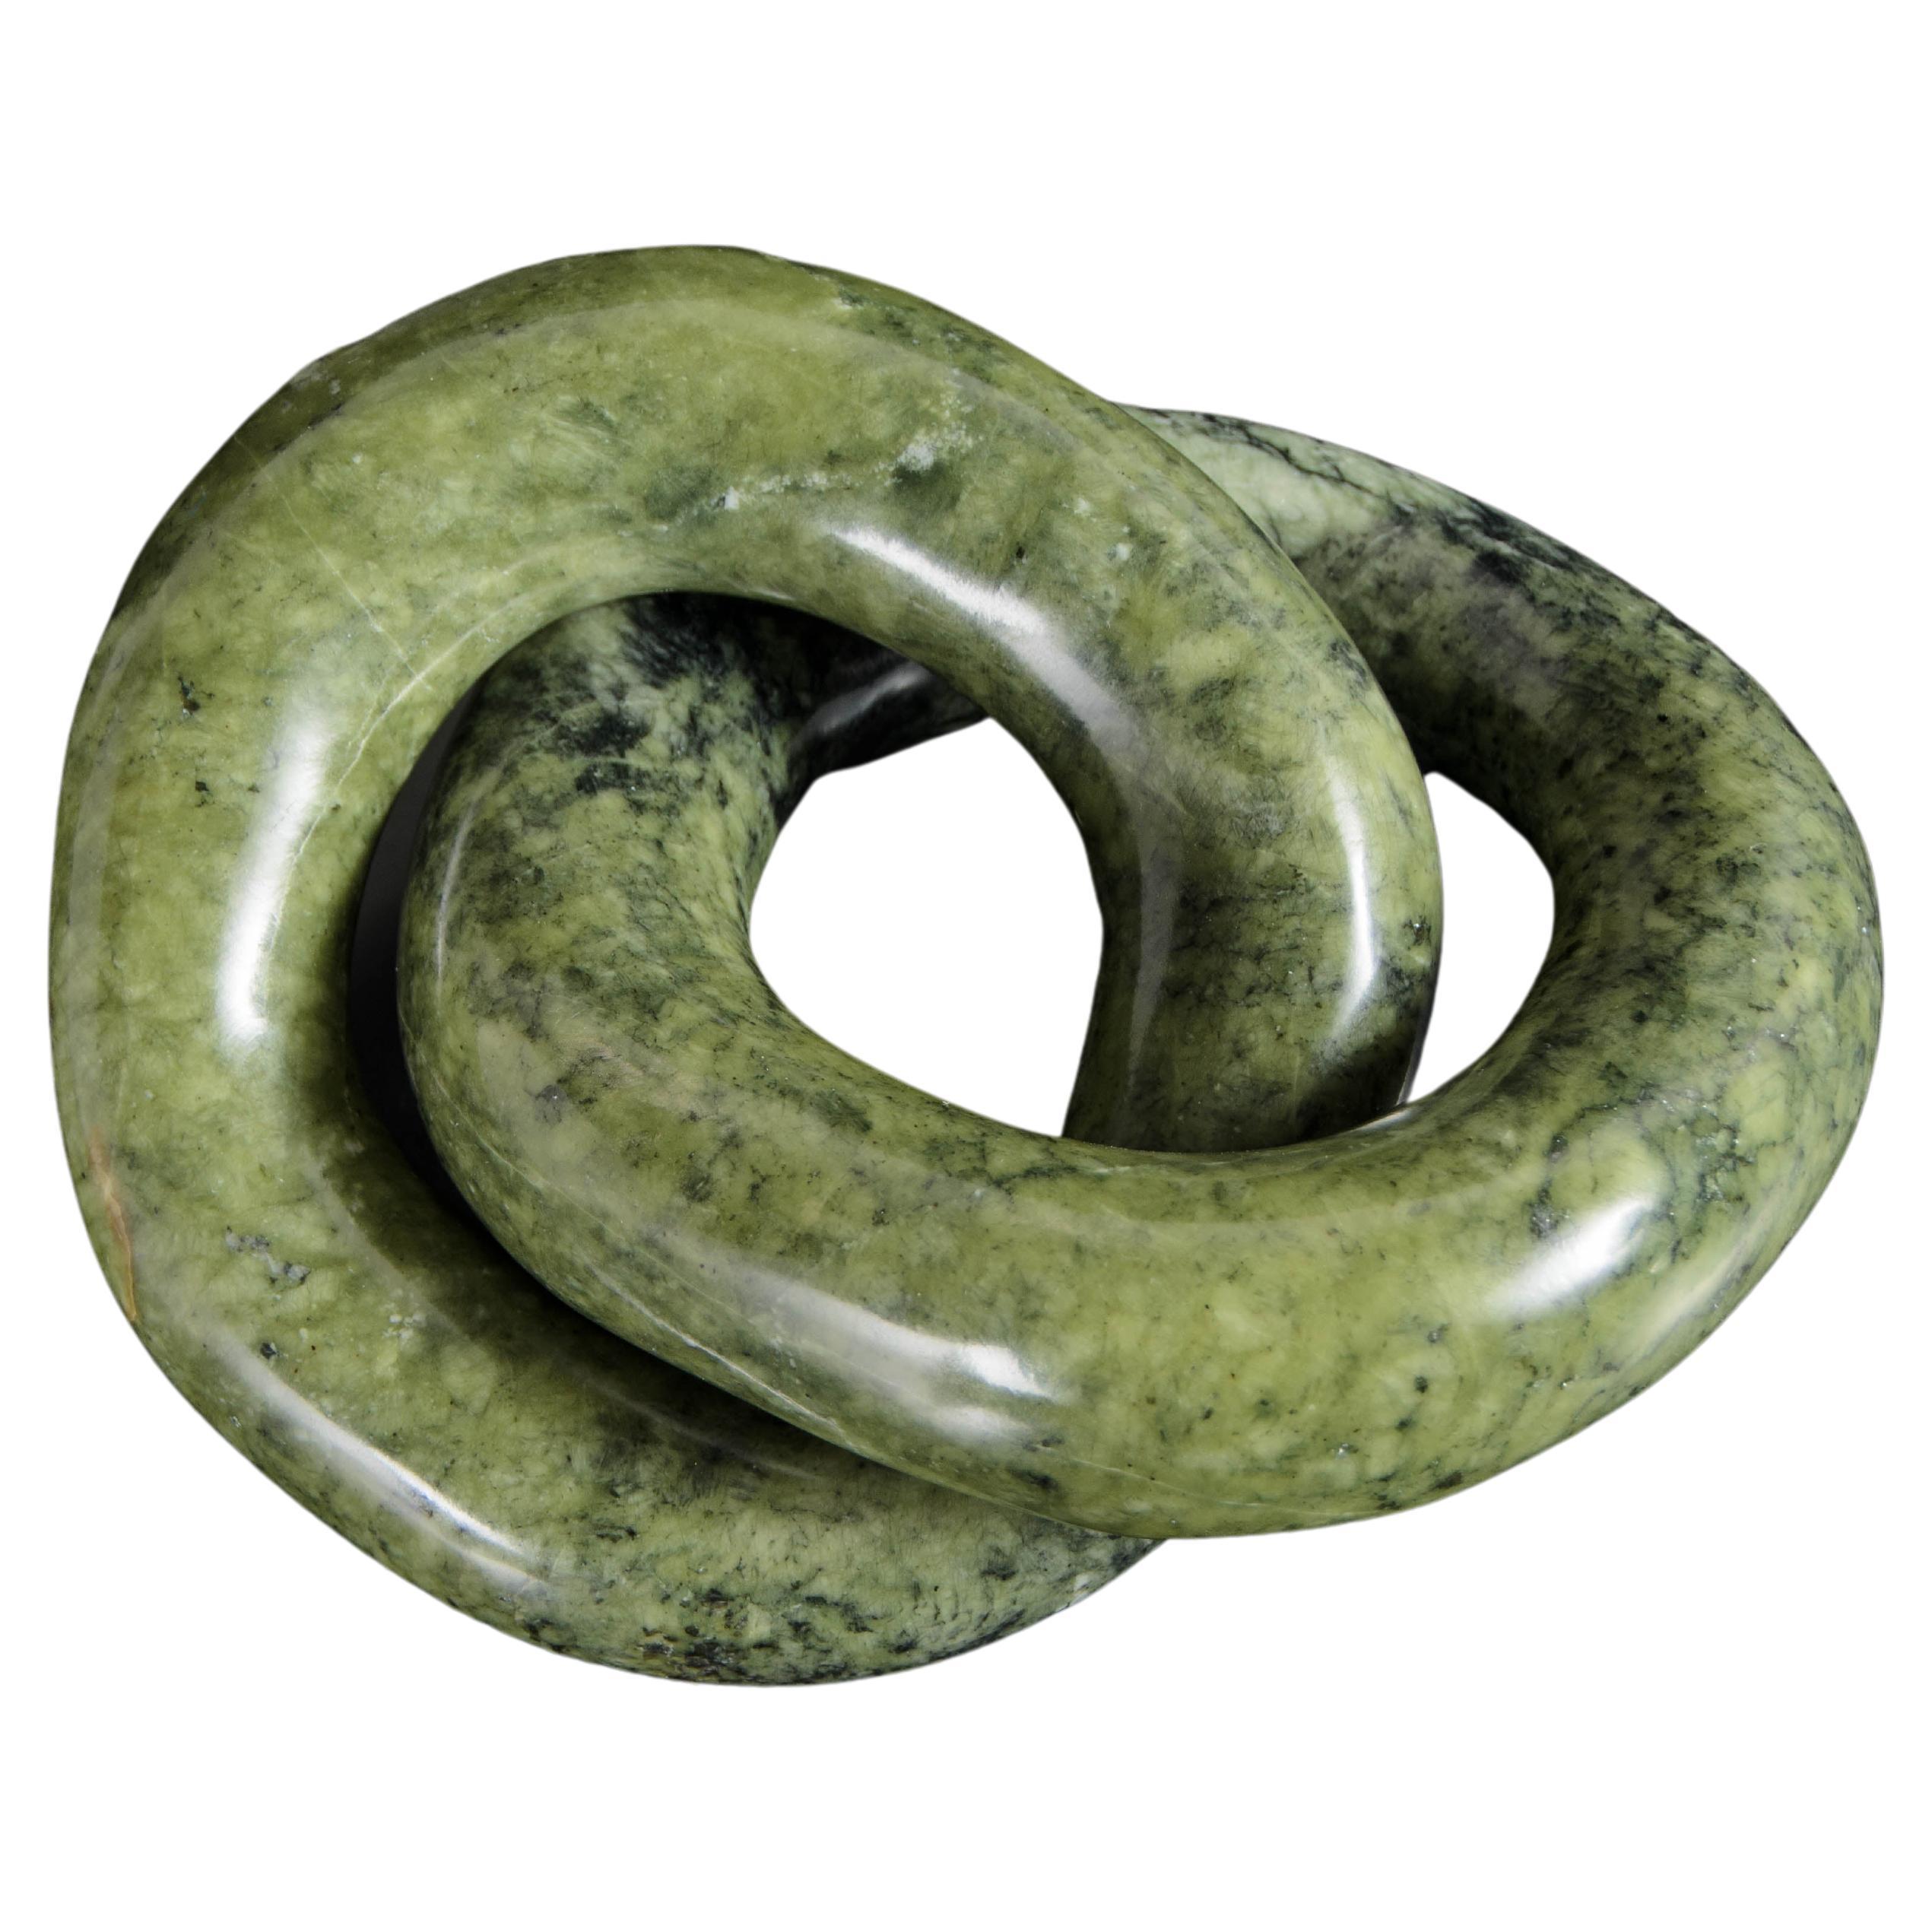 Contemporary Nephrite Jade Double Ring Link Sculpture by Robert Kuo